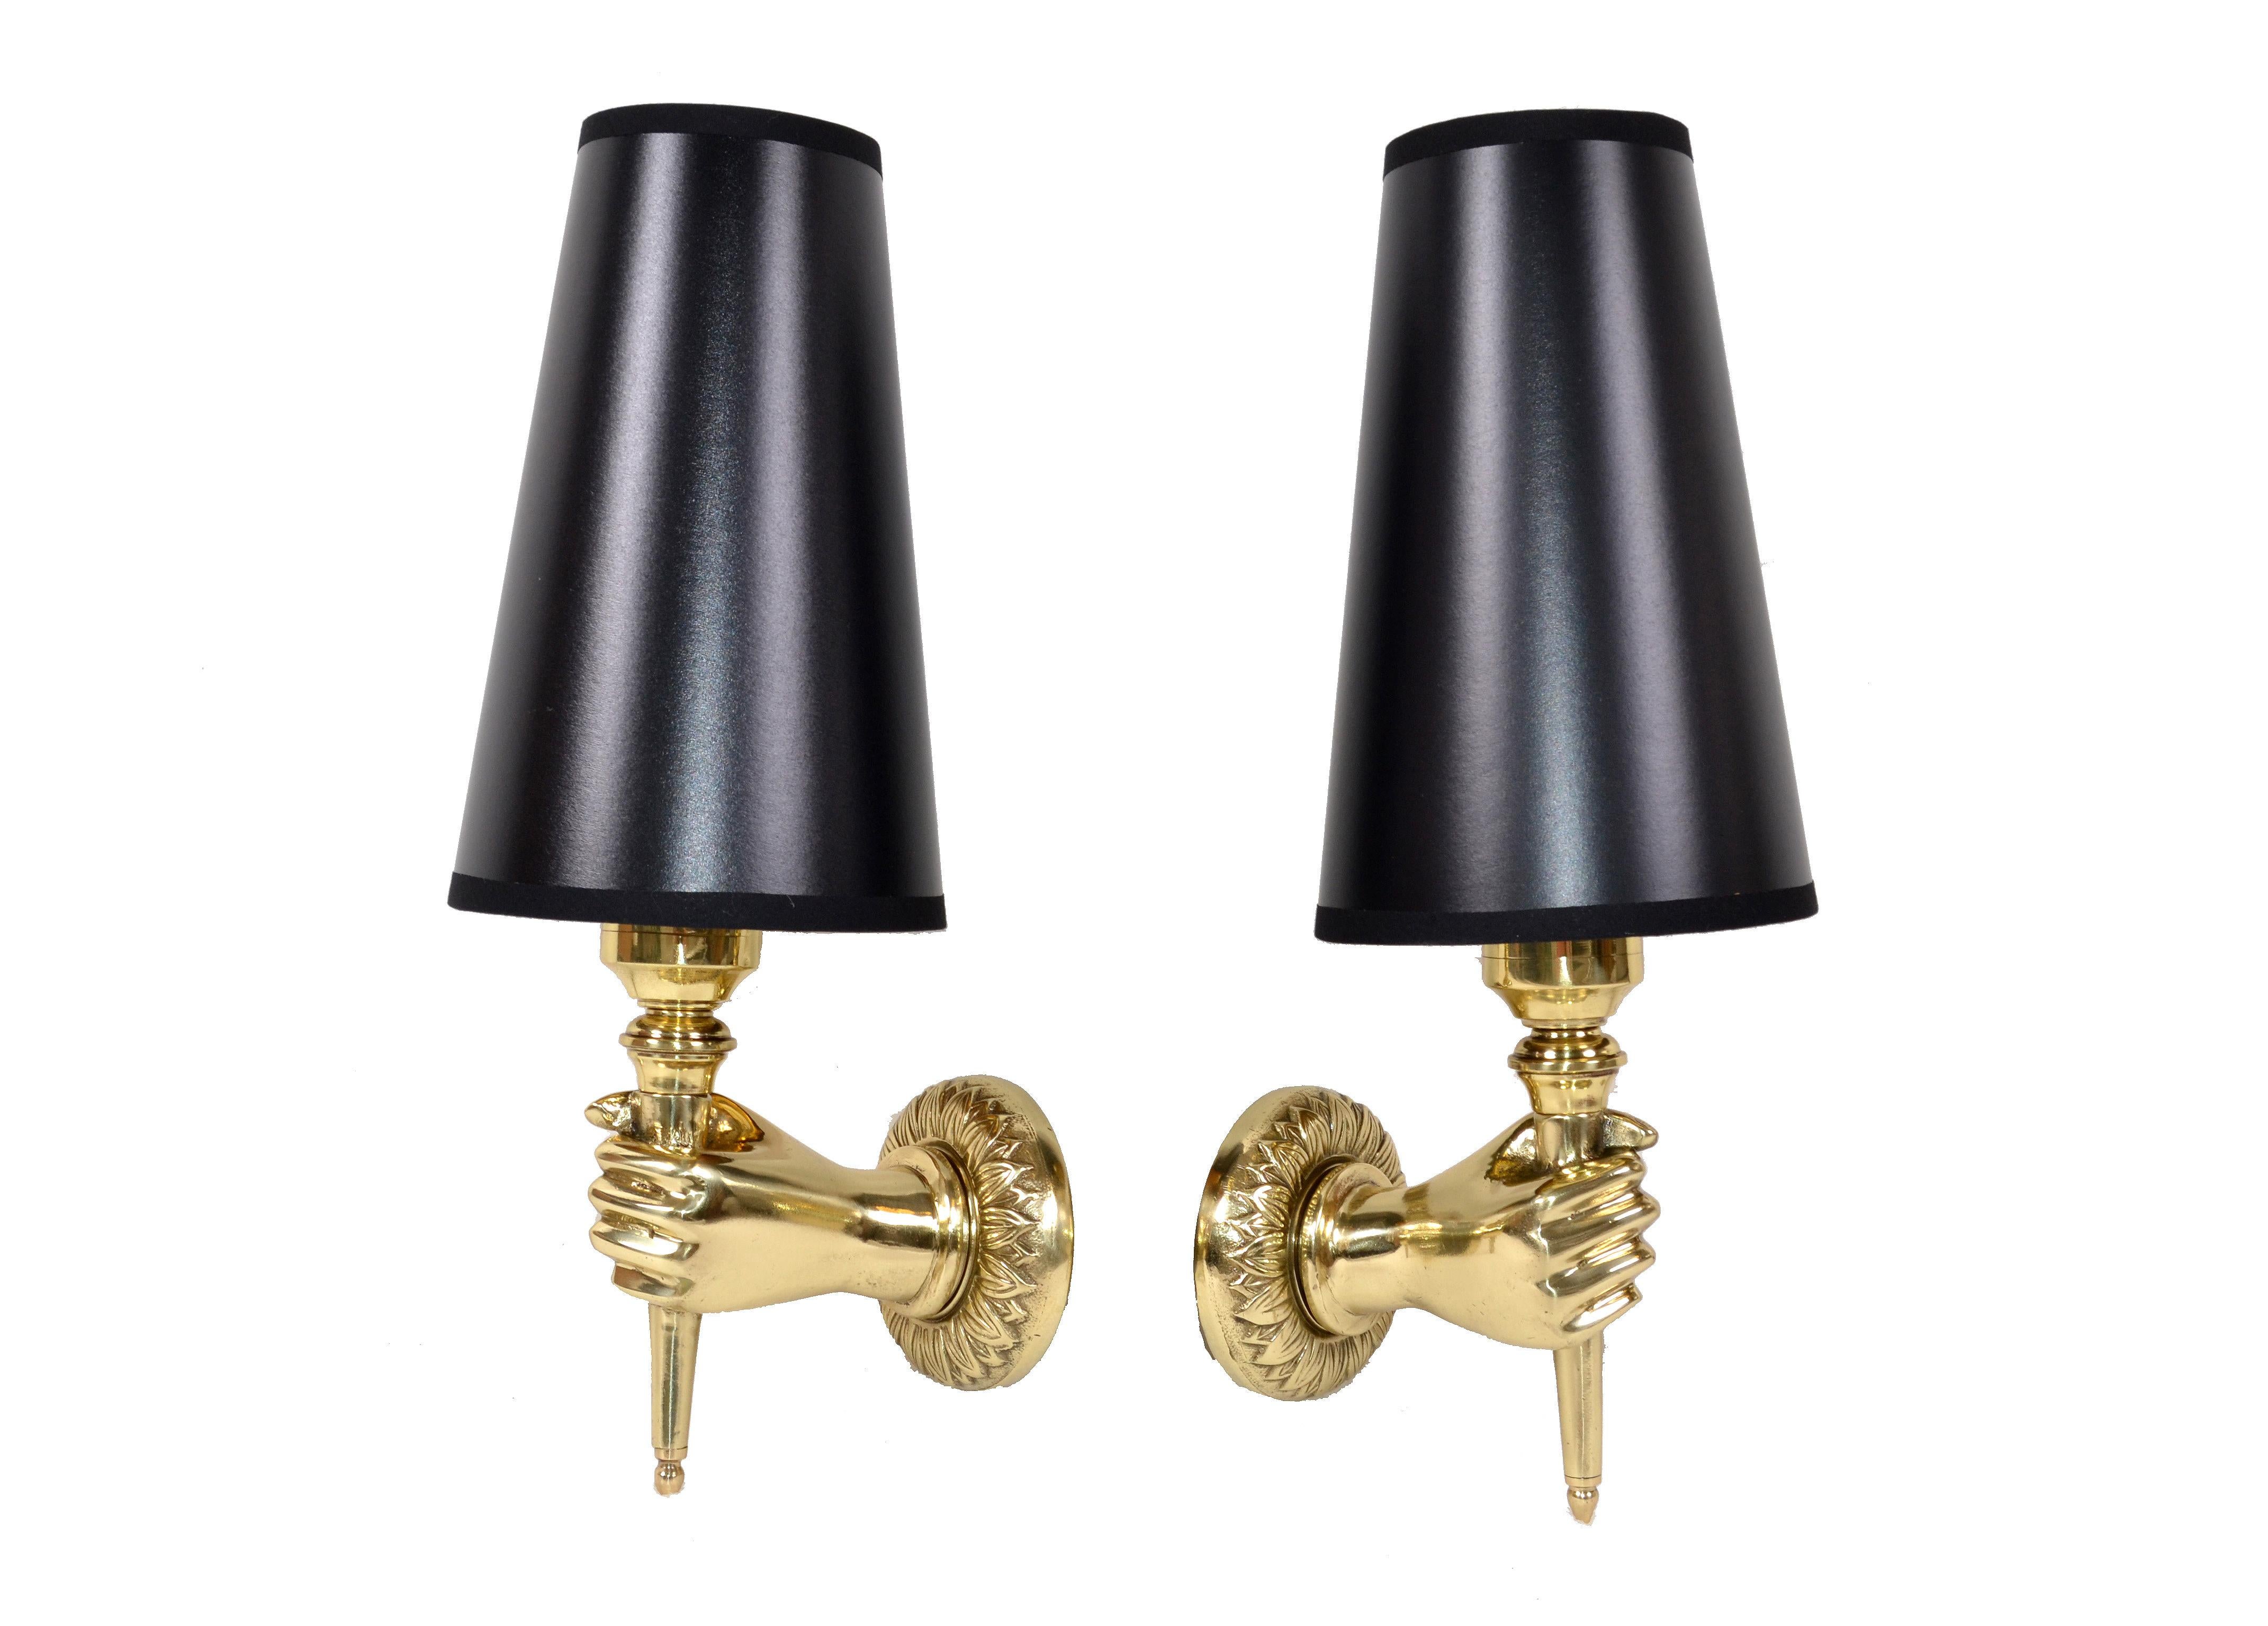 Superb pair of bronze hand sconces designed by André Arbus in France.
The pair comes with black and gold paper cone shade.
US rewiring and each takes one light bulb with max. 40 watts.
Back plate measures: 3.25 inches diameter
Shade measures: